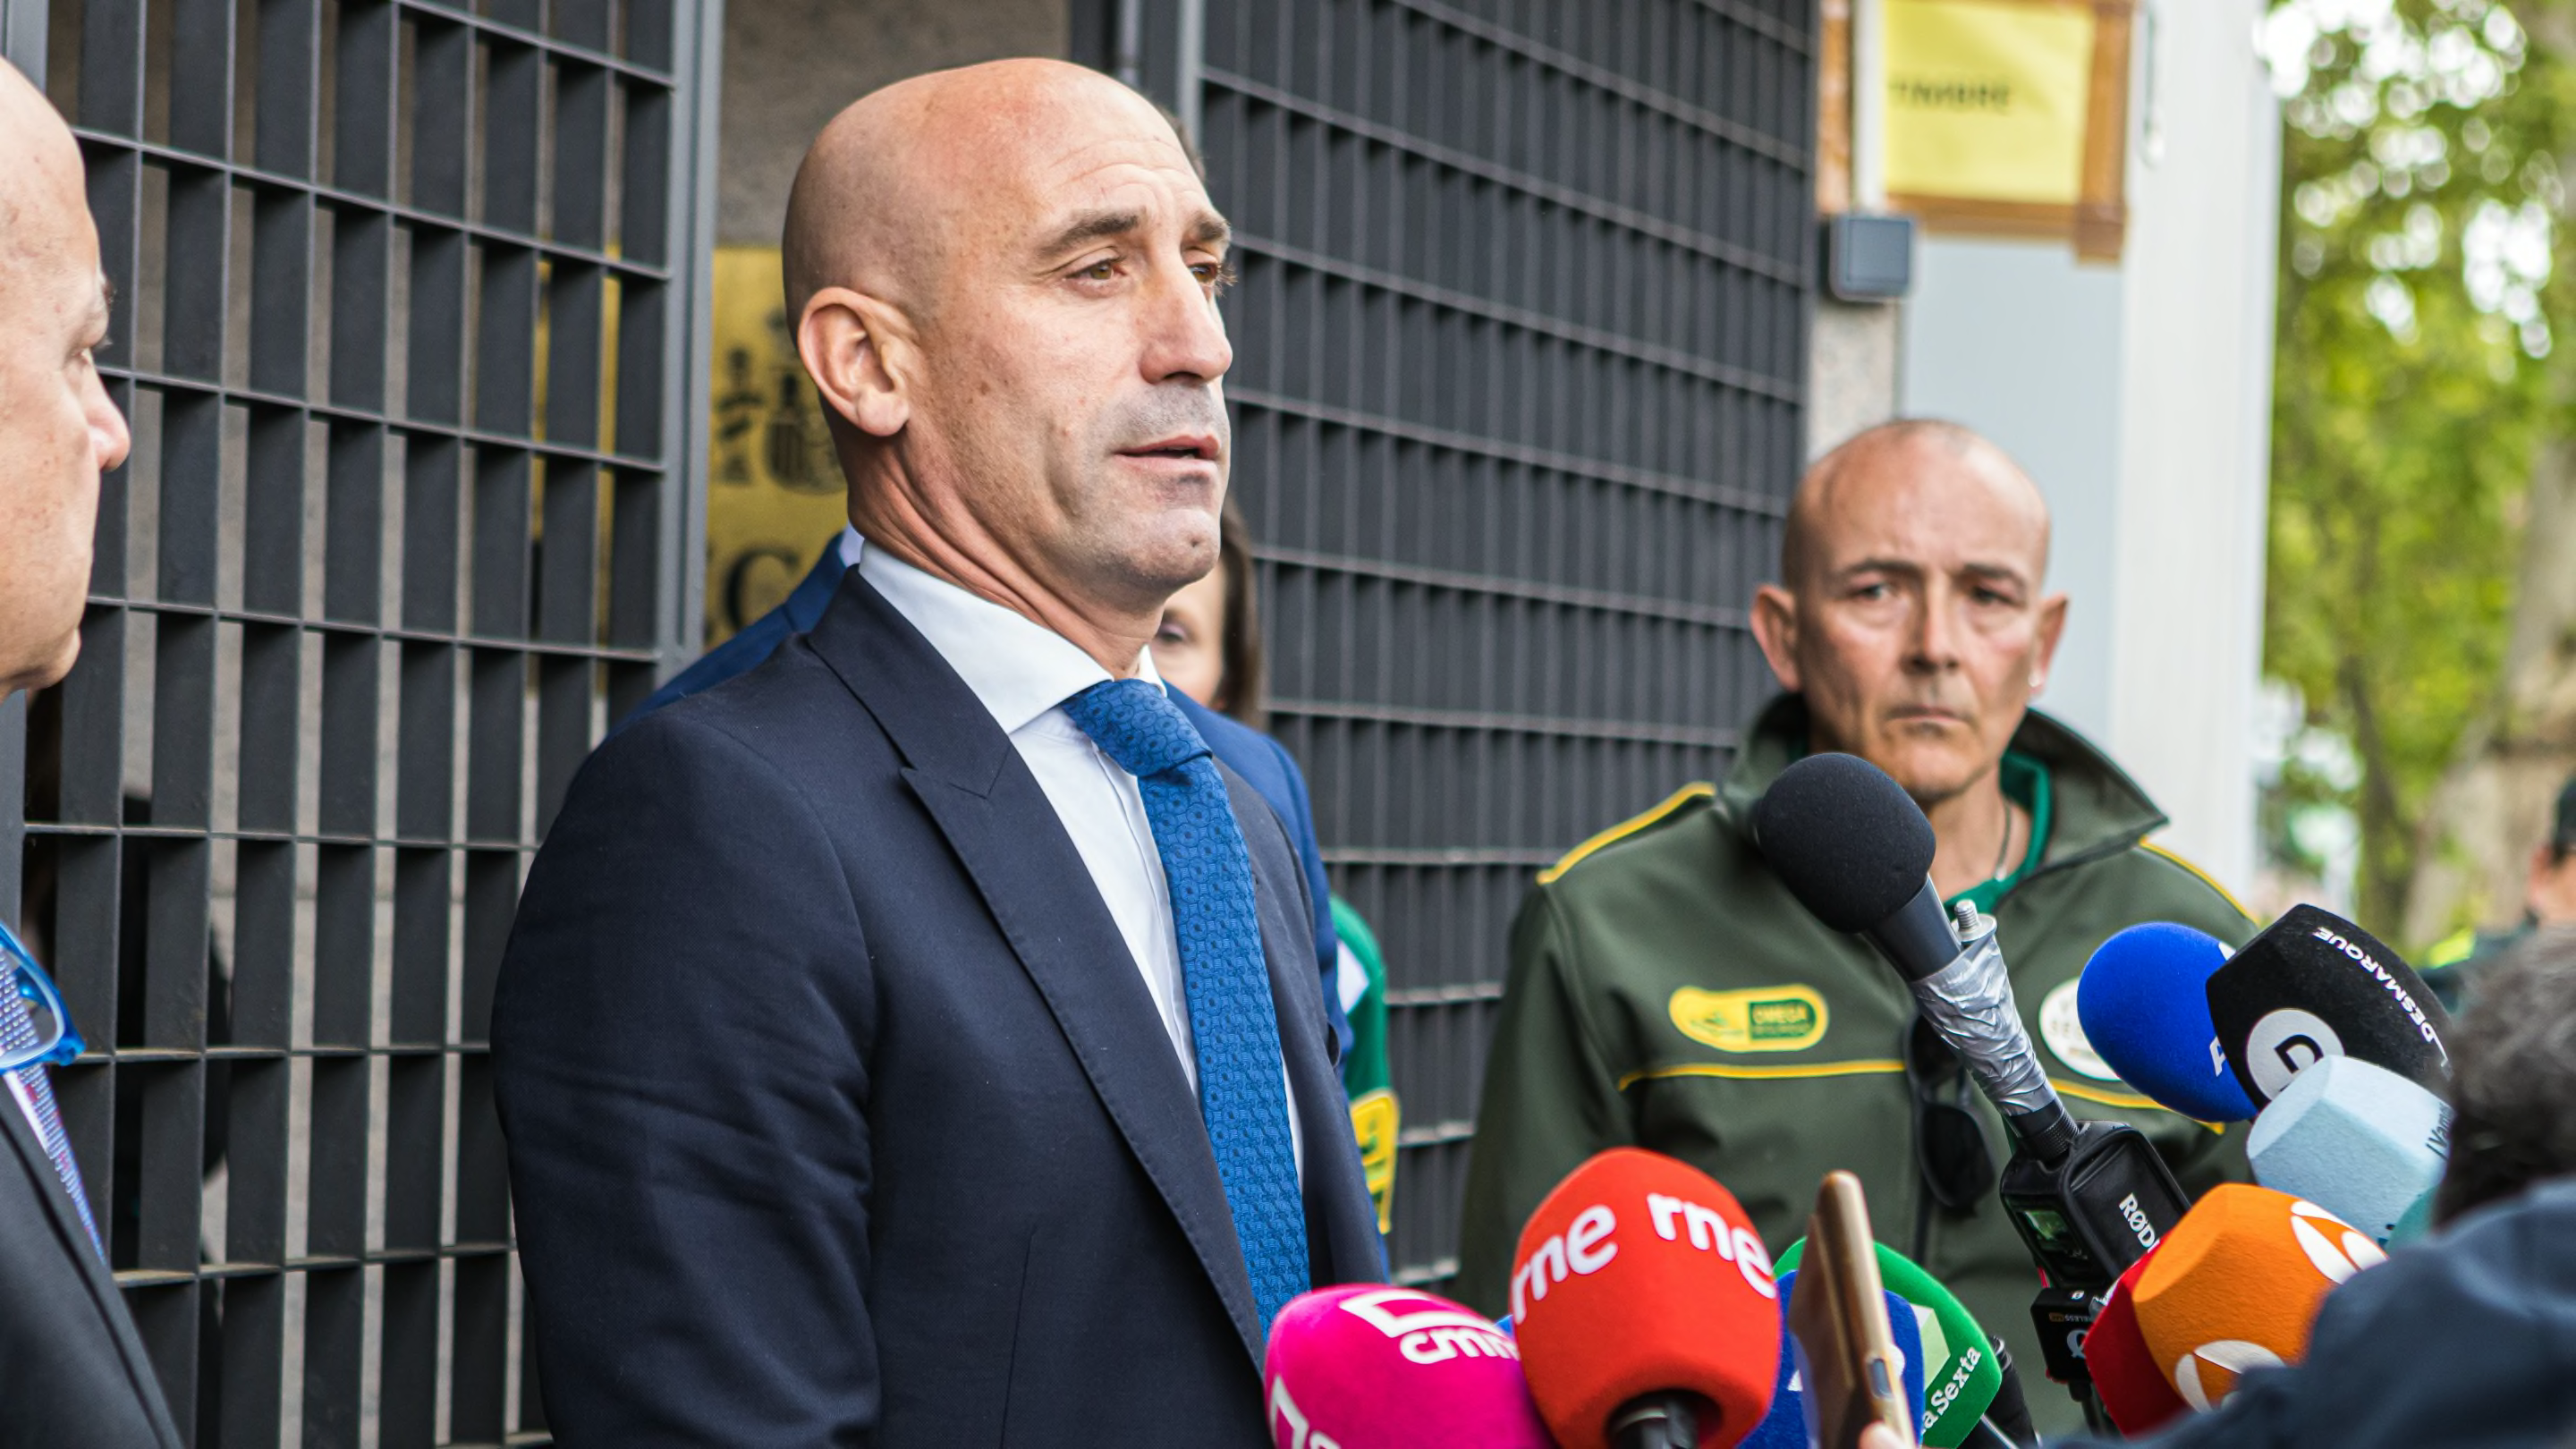 Judge orders Luis Rubiales to stand trial over Jenni Hermoso kiss